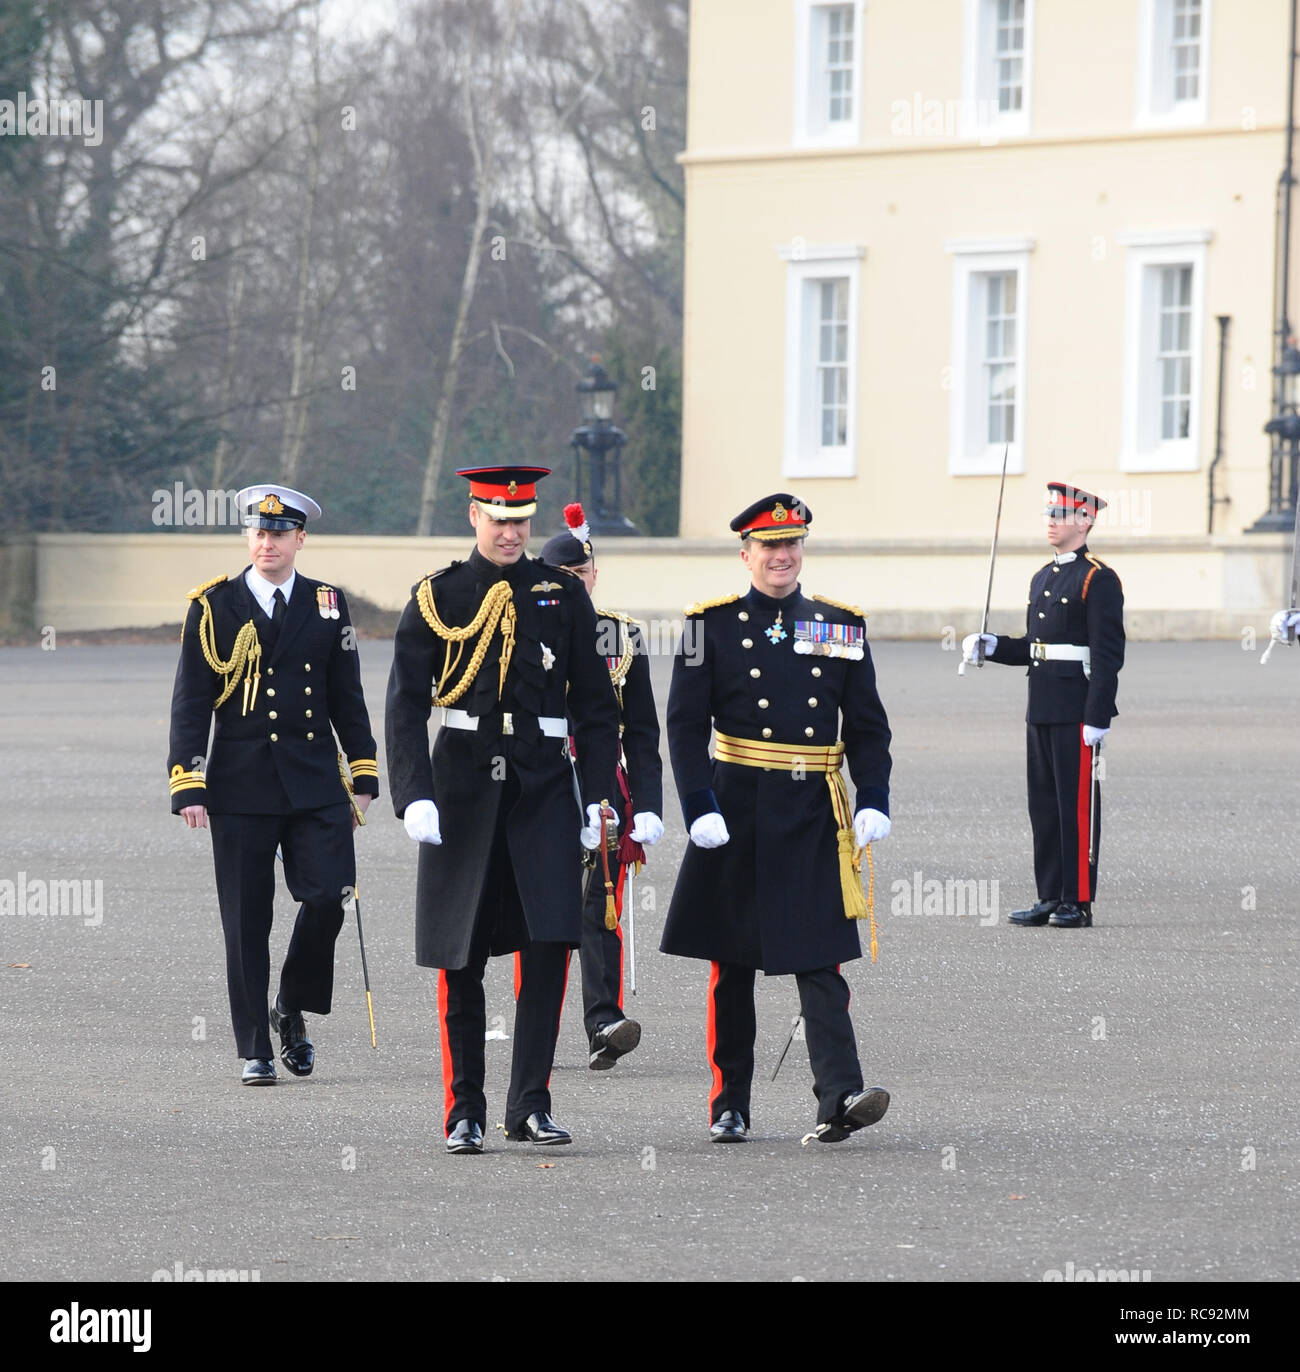 Prince William, The Duke of Cambridge attends the Sovereign's Parade at the Royal Military Academy Sandhurst  Featuring: General Views, Duke of Cambridge Where: London, United Kingdom When: 14 Dec 2018 Credit: WENN.com Stock Photo